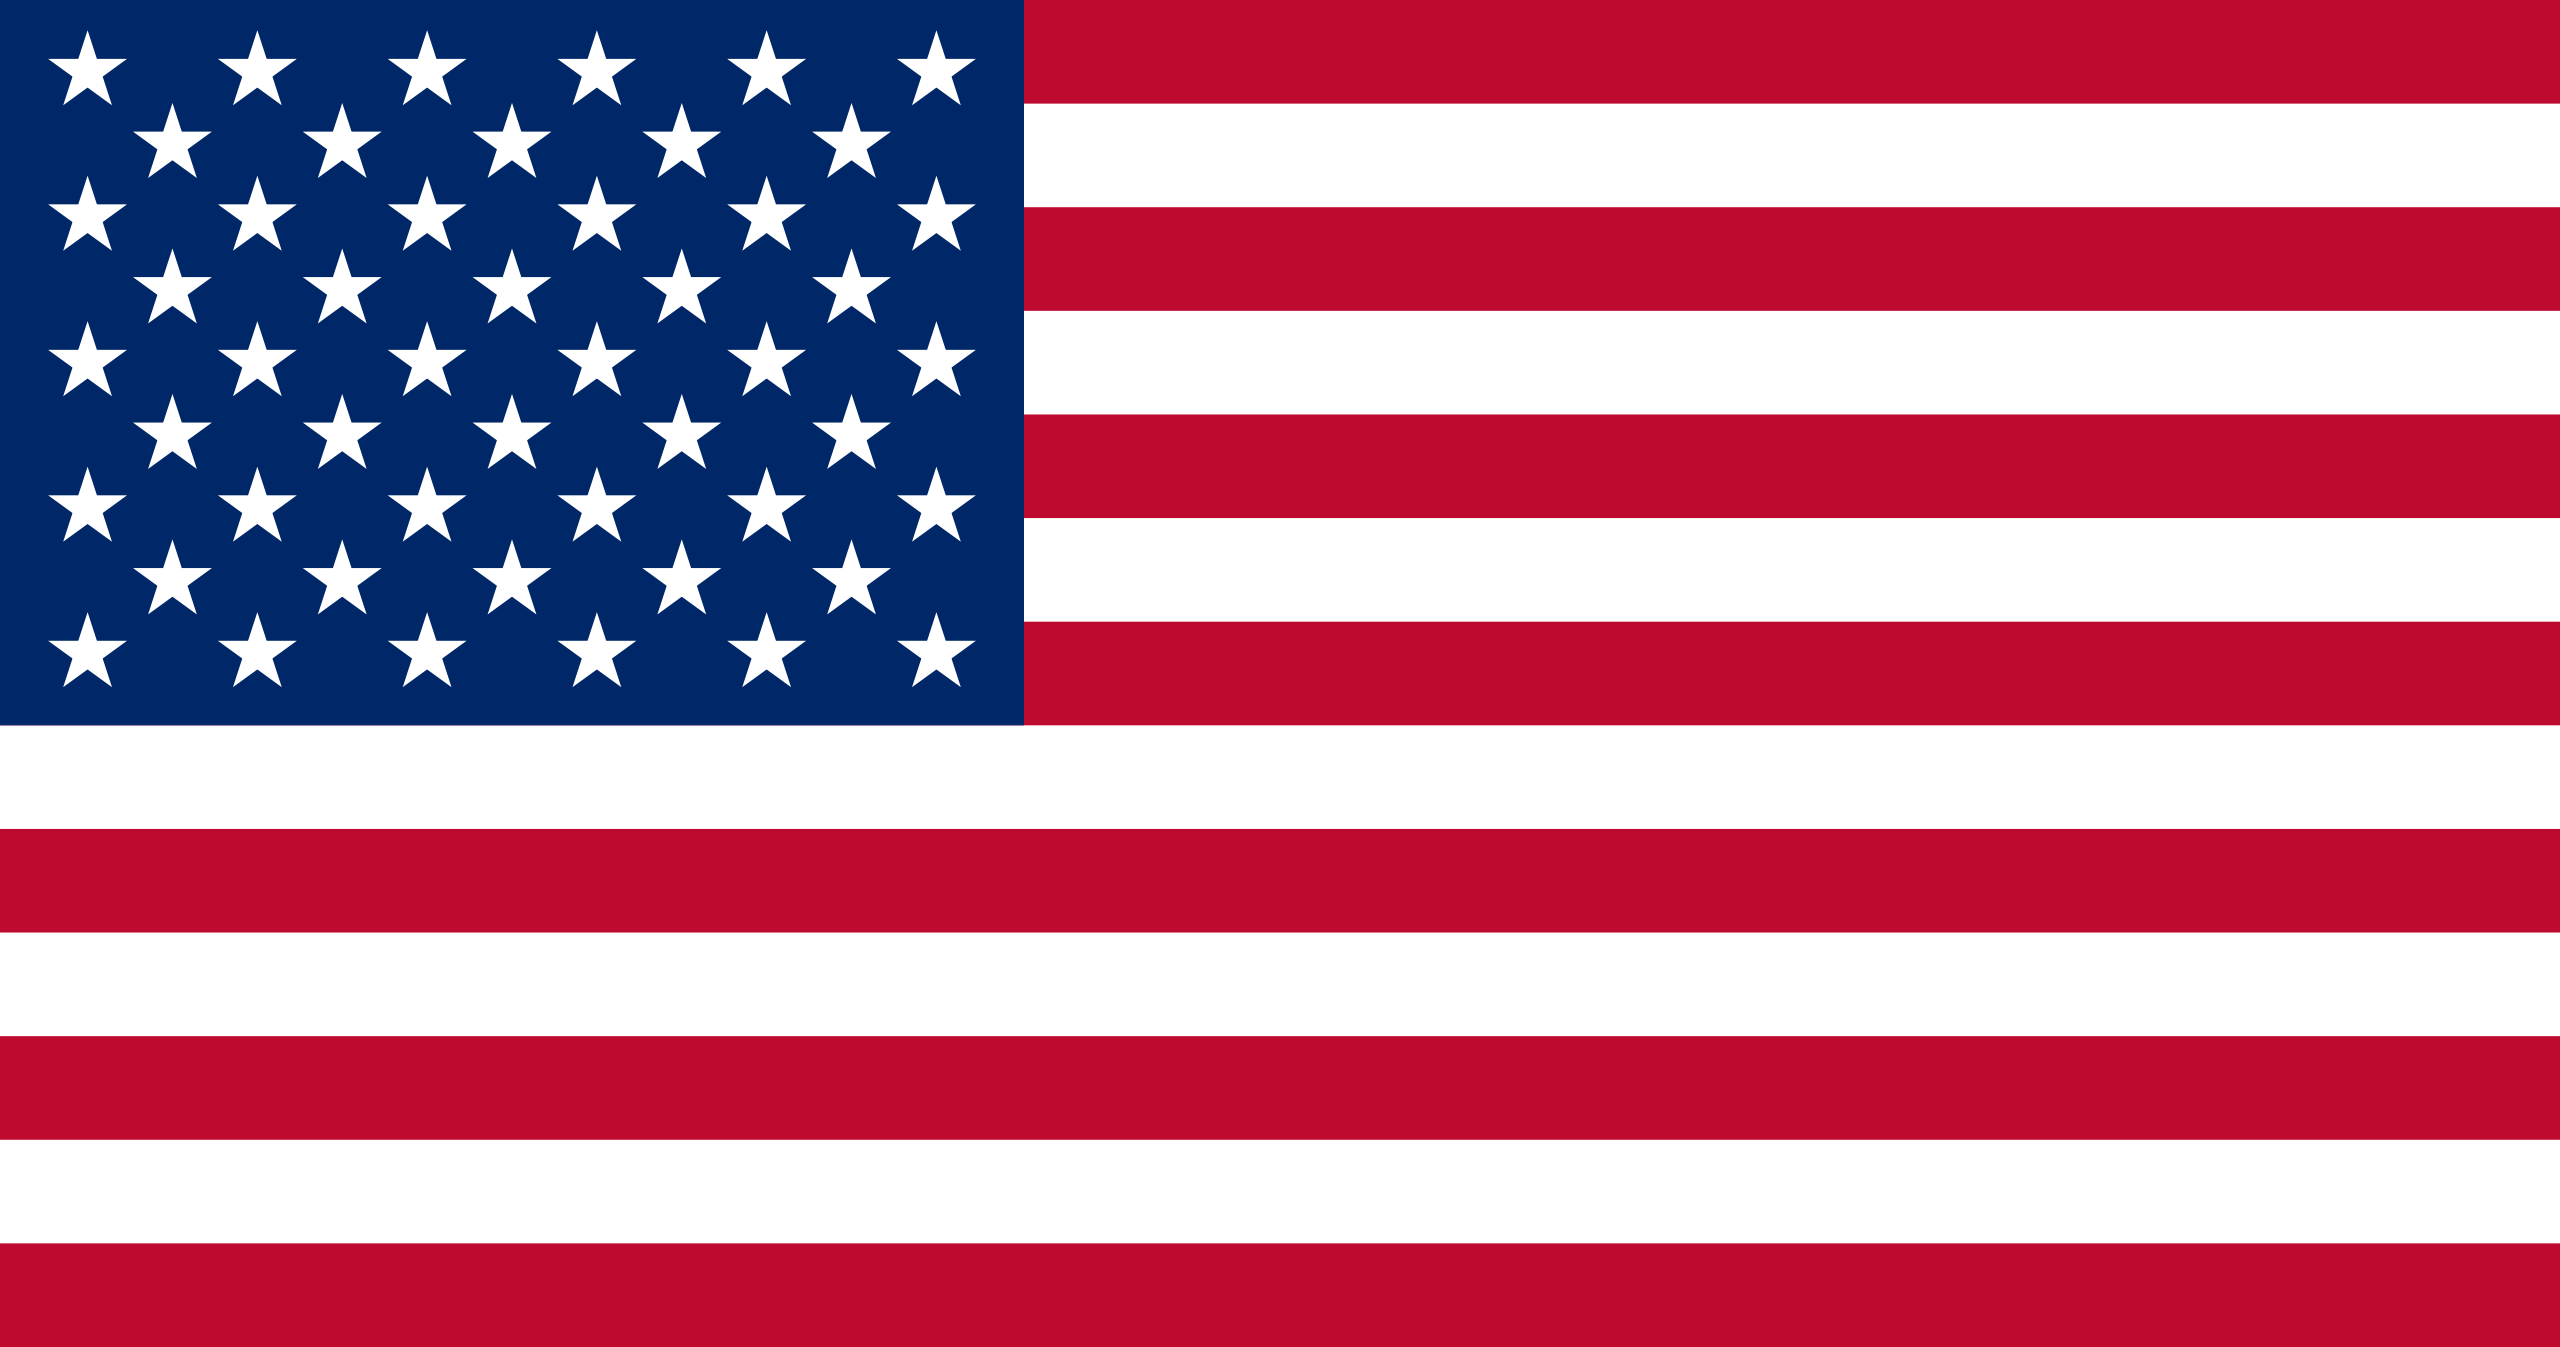 United States | Flags of countries